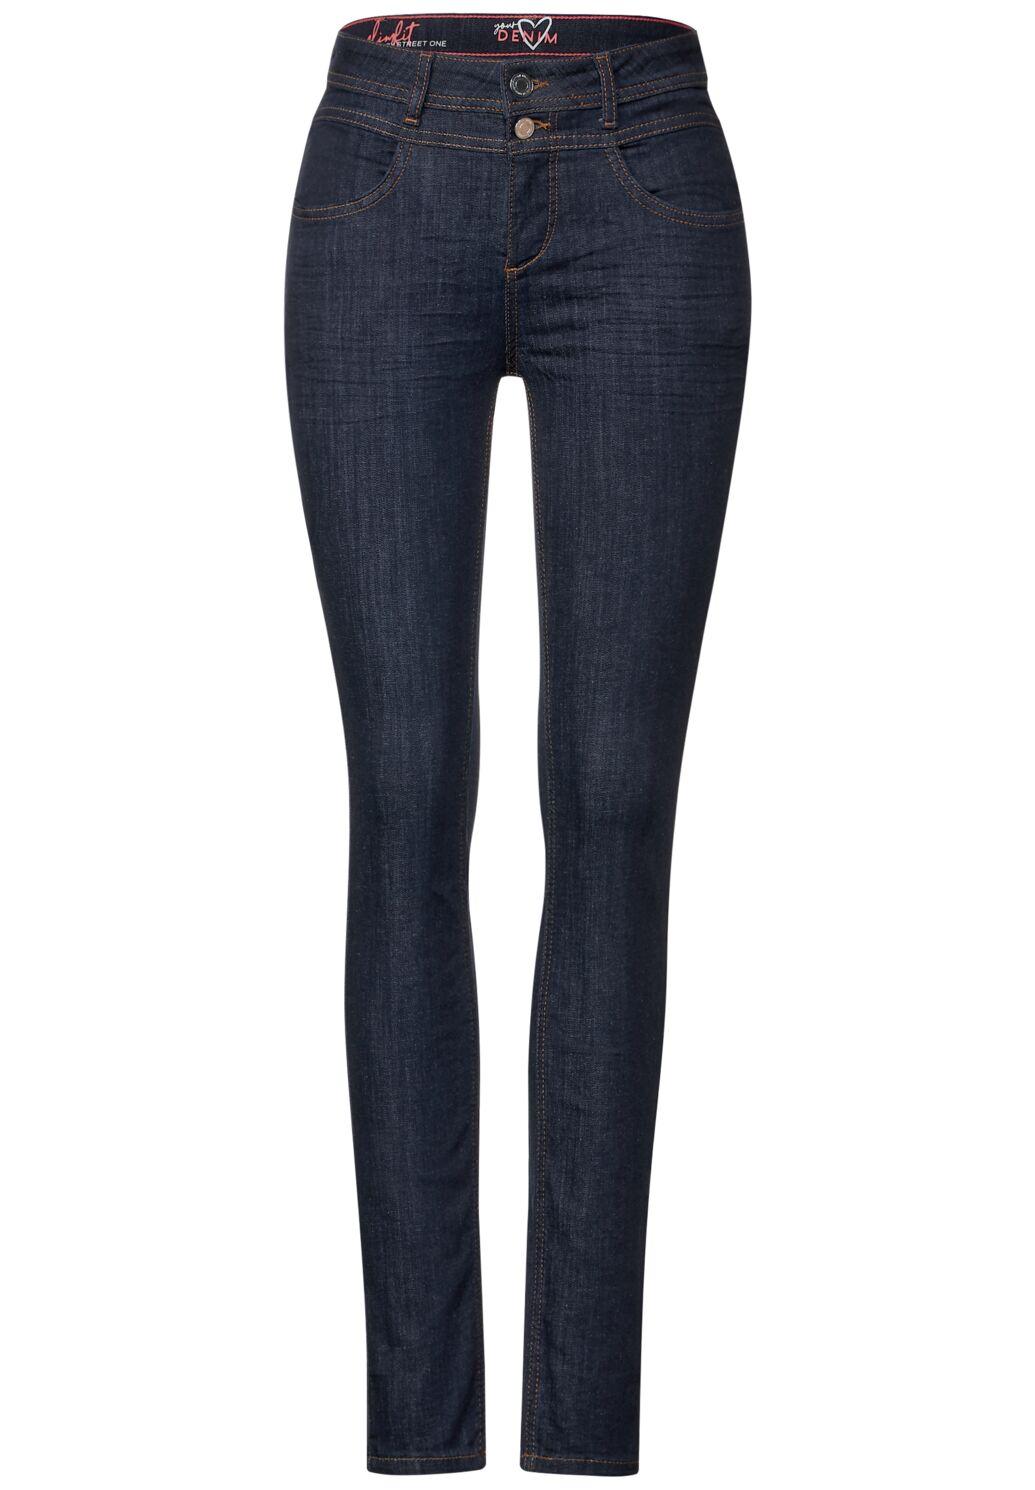 Street One - Slim Fit Jeans Hose im Style "York" clean rinsed A376180-14894